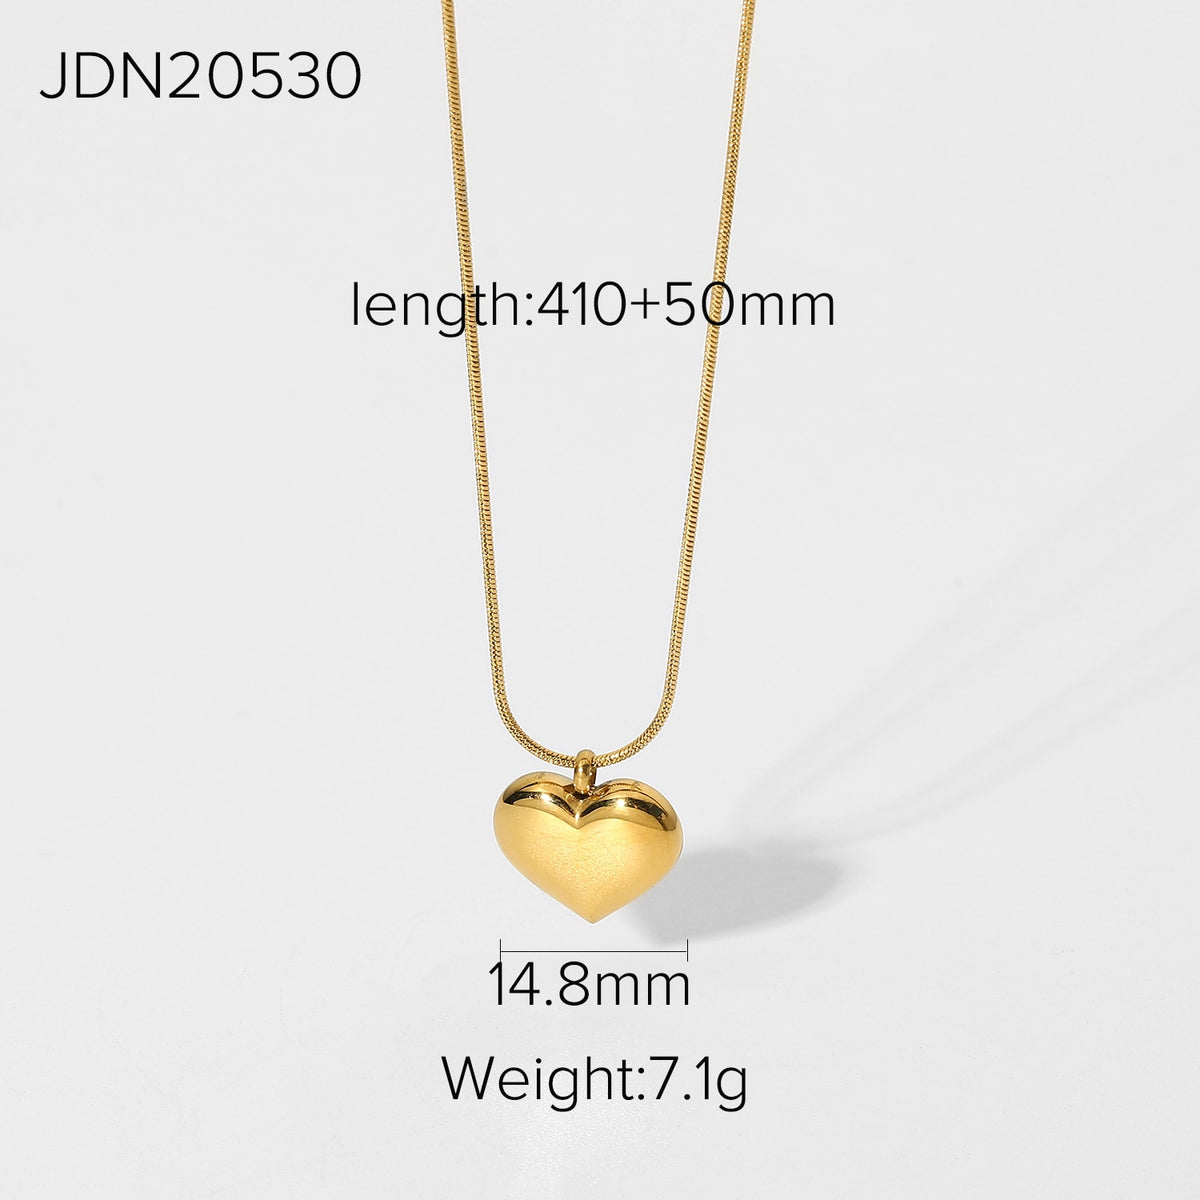 Thin Snake Chain Heart Shape Pendant Necklace For Women 18K Gold Plated Stainless Steel Chokers Necklace Party Gifts